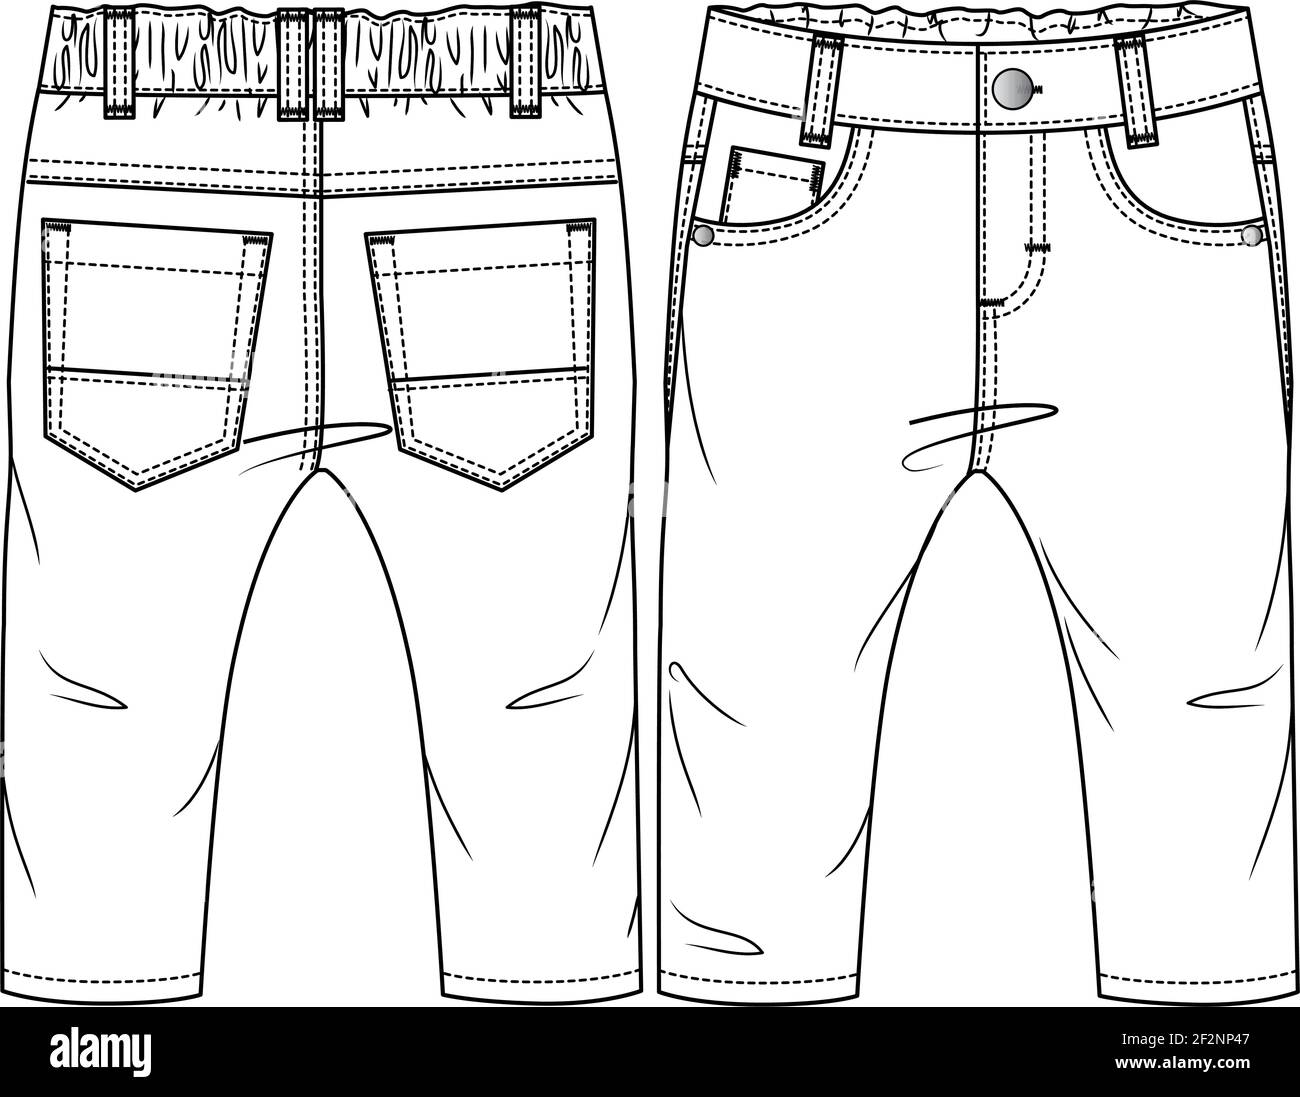 Baby Boys 5 pockets Pant fashion flat sketch template. Technical Fashion Illustration. Woven, Denim, Twill CAD Stock Vector